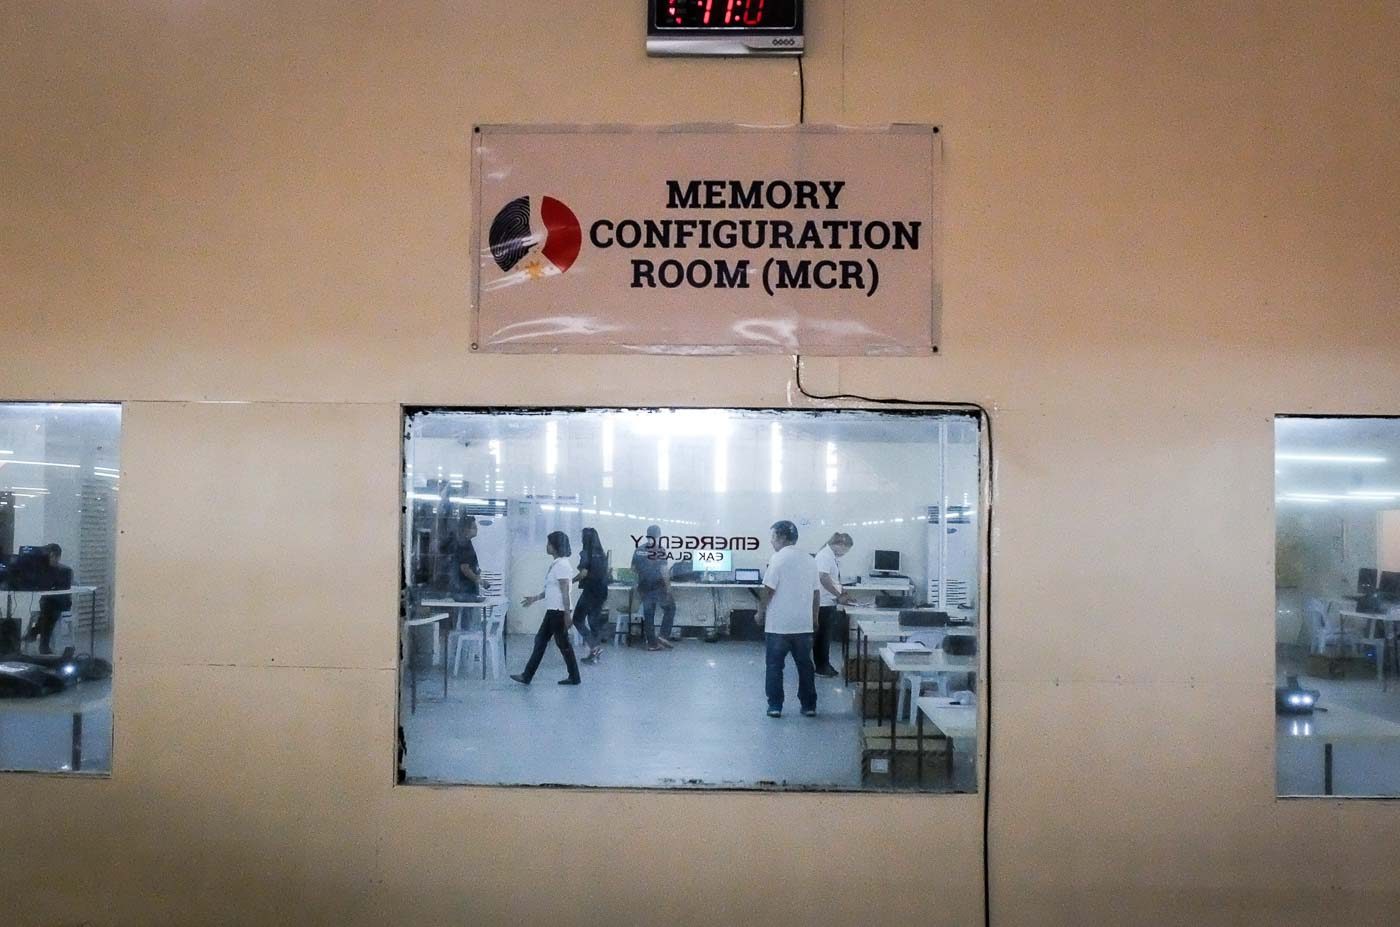 The Memory Configuration Room, found inside the main production facility, is only accessible to a limited number of Comelec and Smartmatic employees. The room houses the election management system, which loads election-related data to prepare the ballot faces and creates configuration files for the VCMs. 